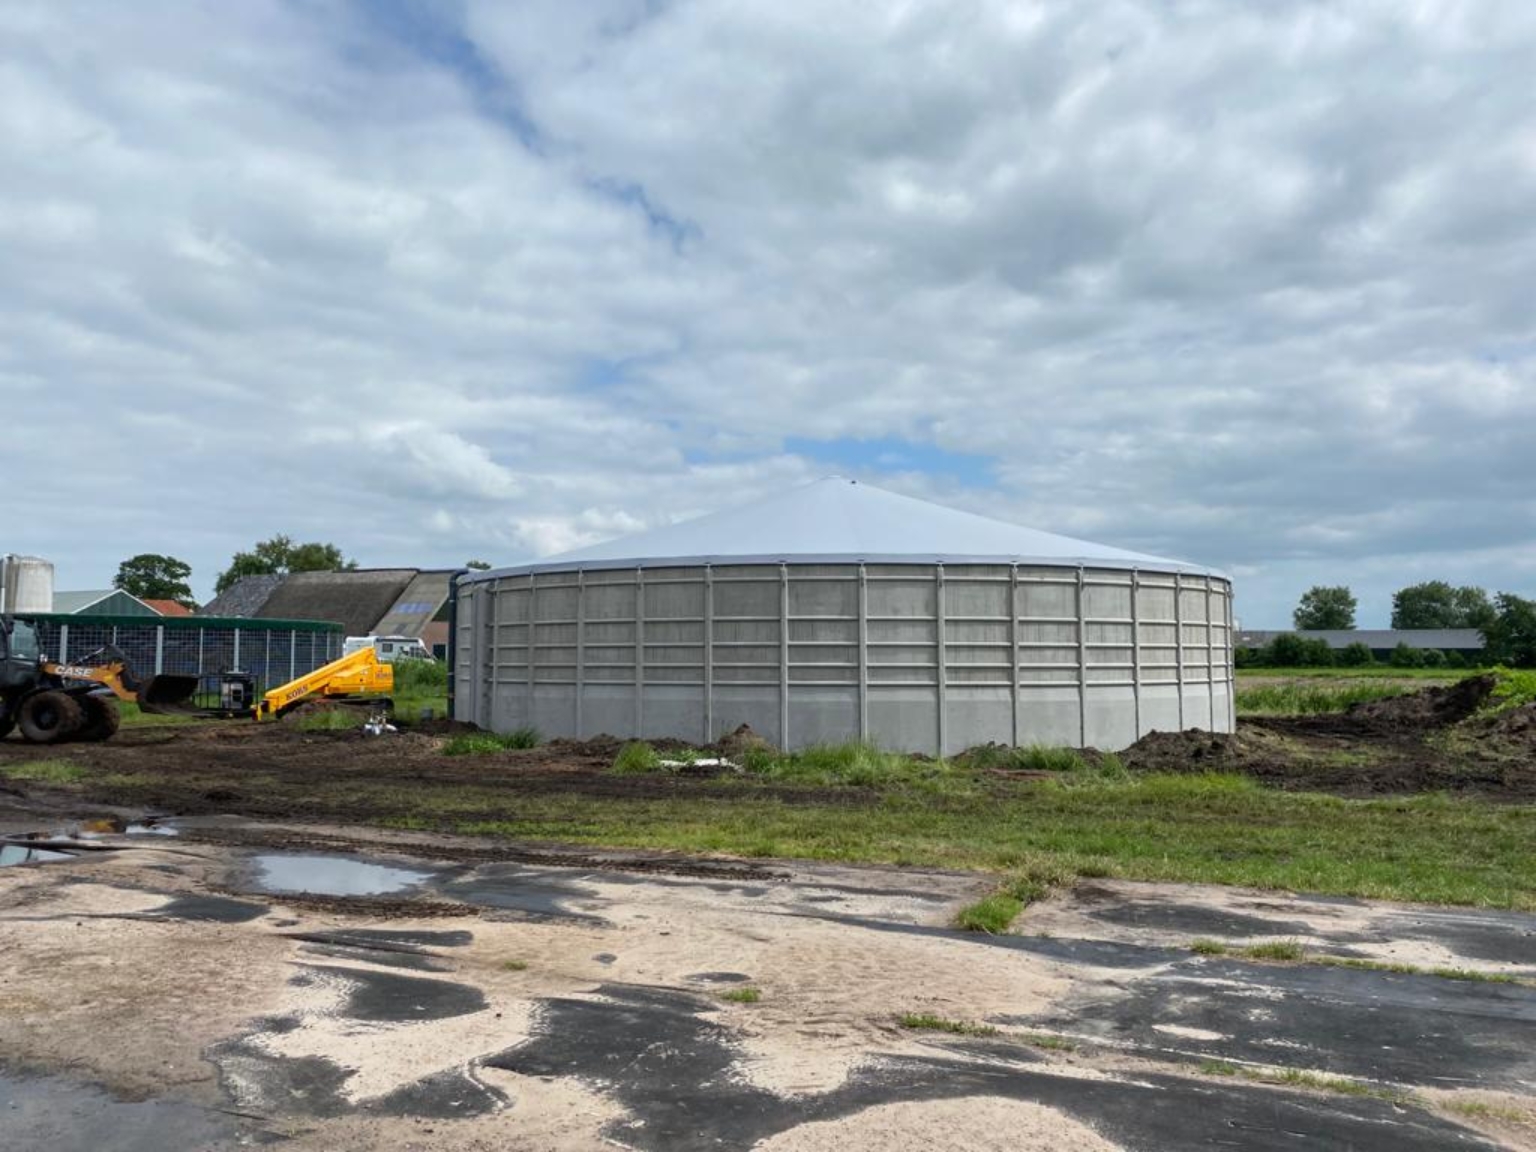 Completed concrete silo at Brand Dairy Farm